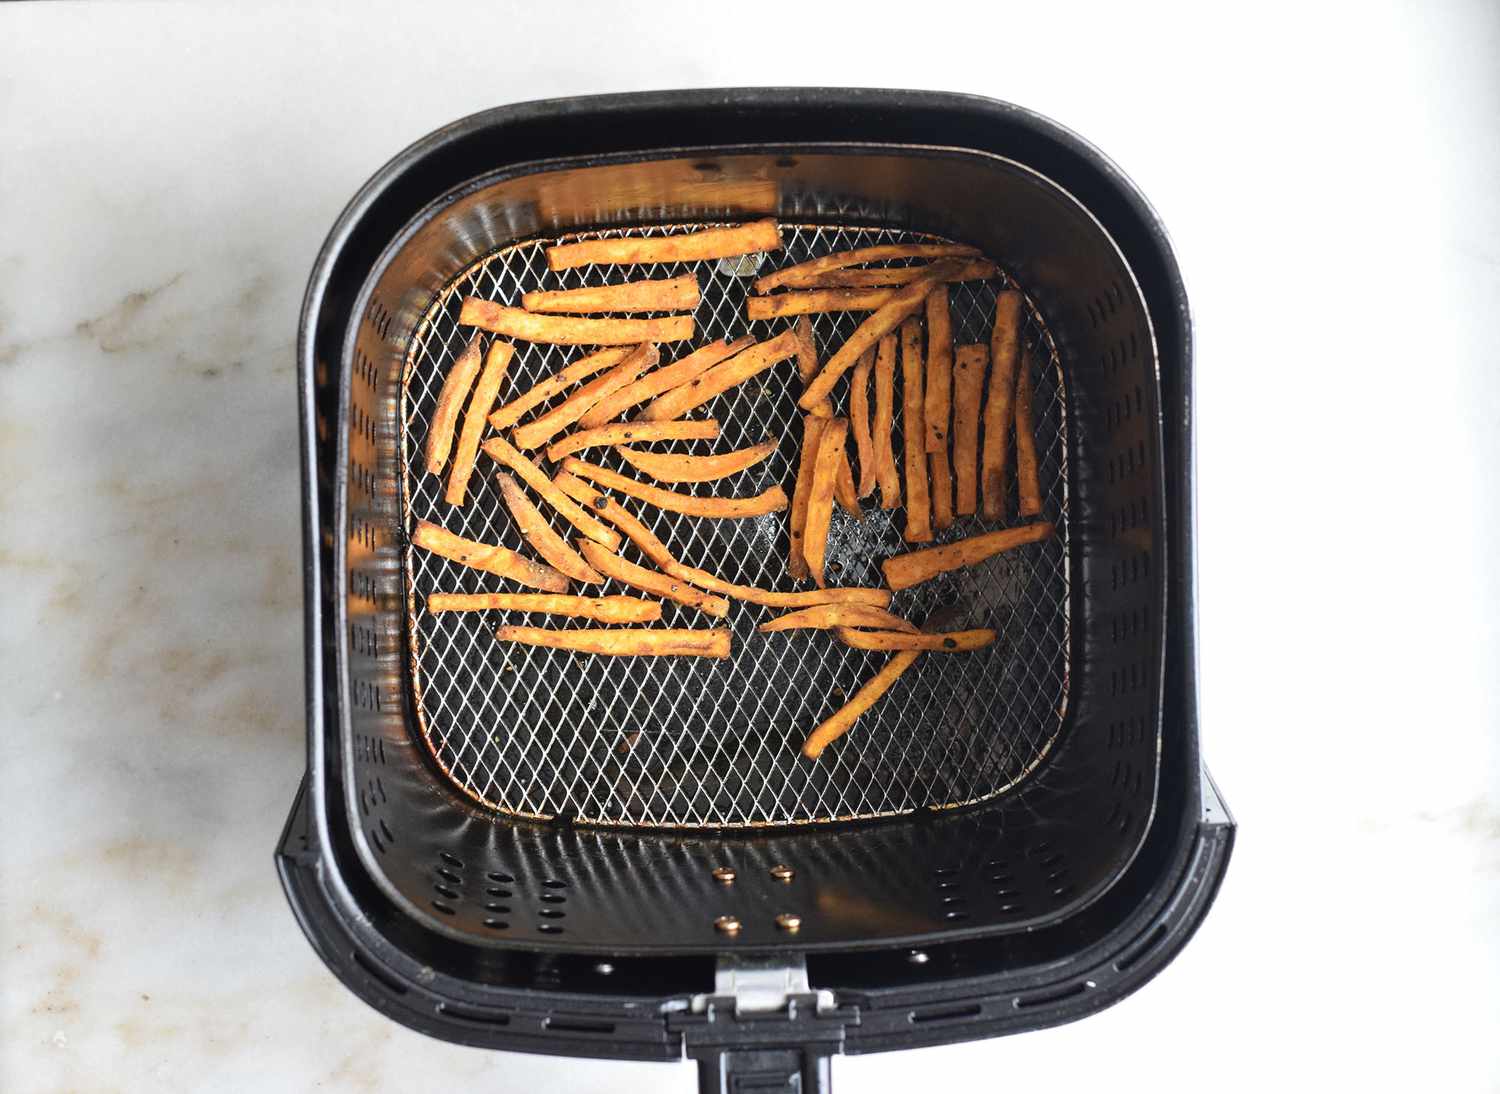 Cooked sweet potato fries in the air fryer